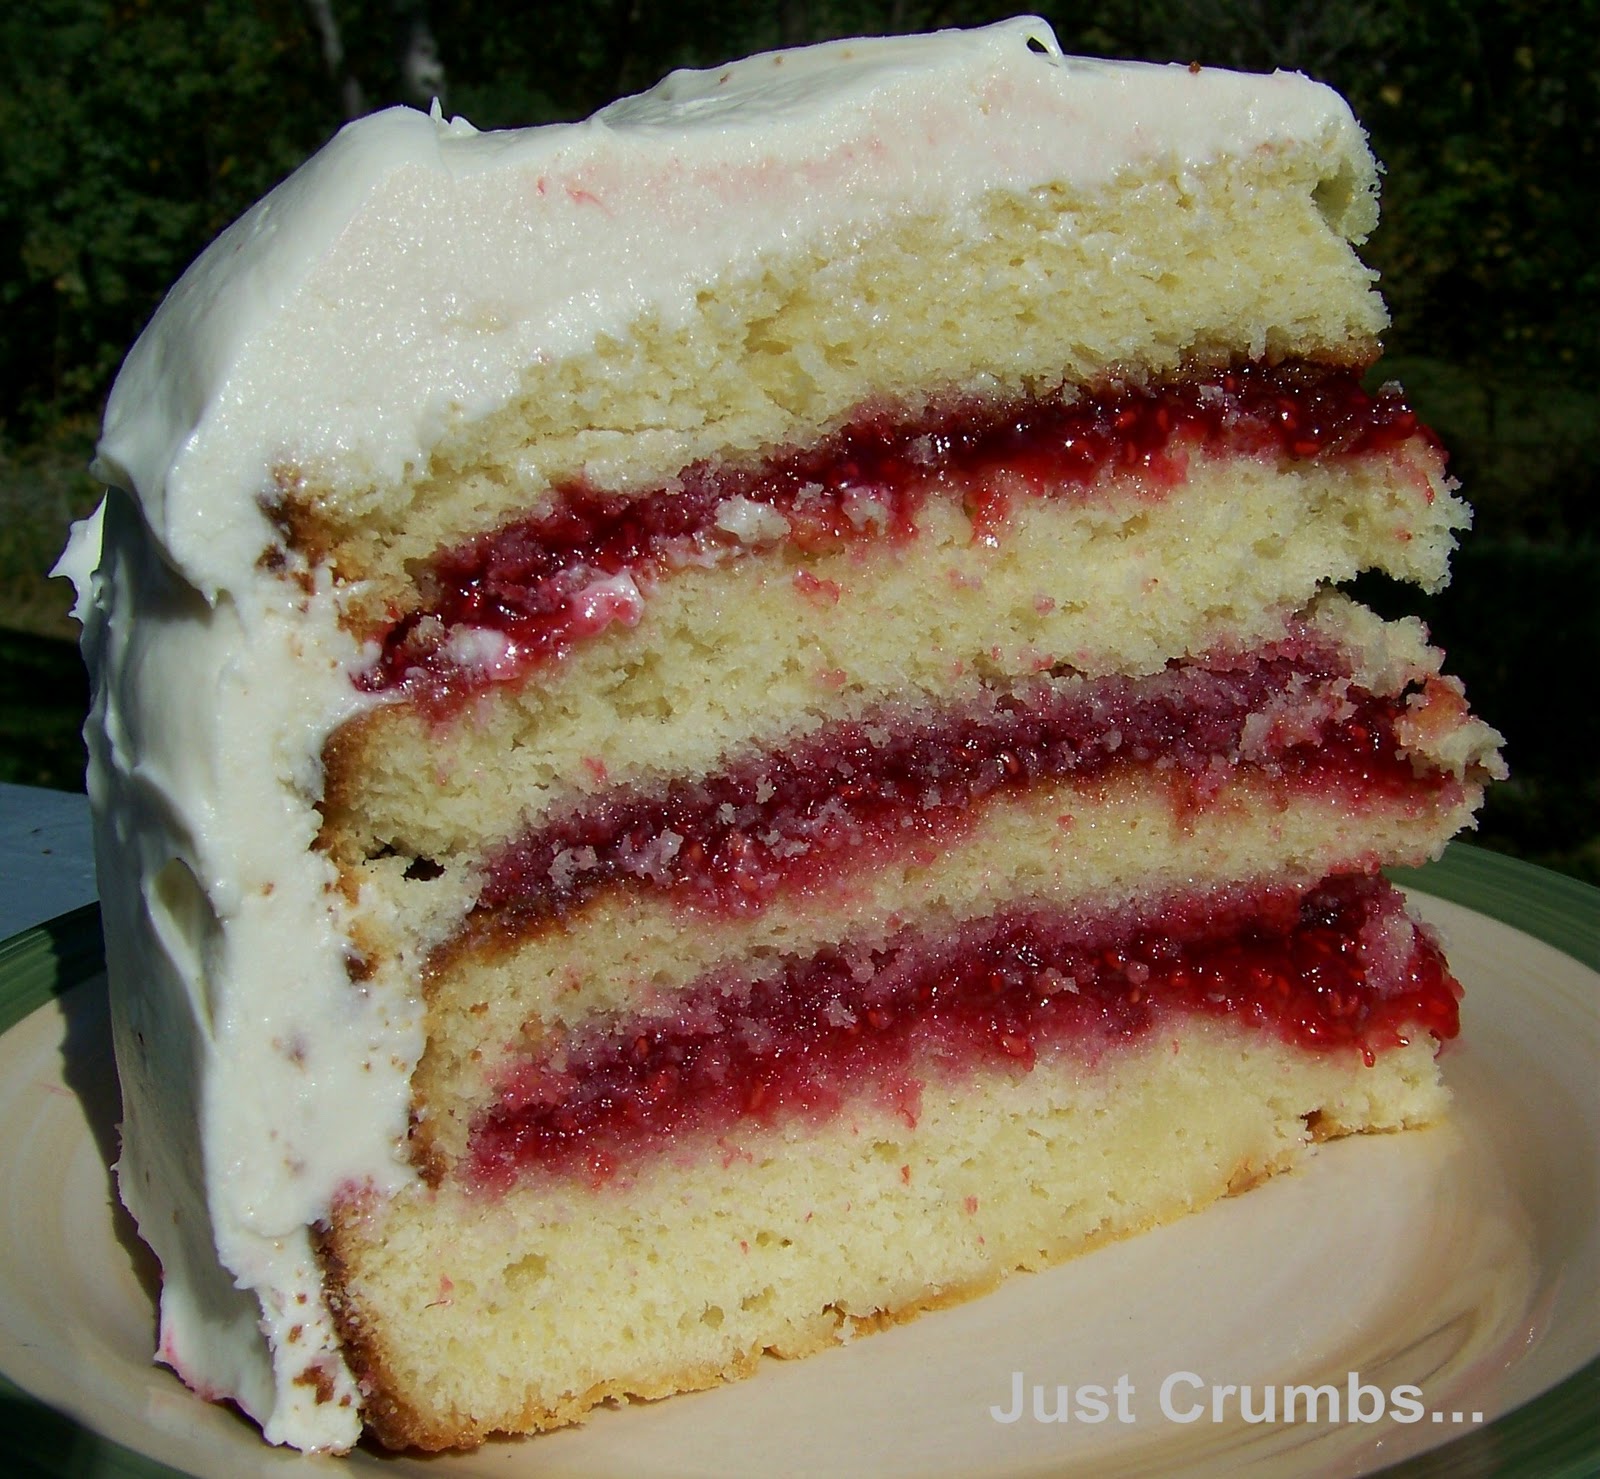 Just Crumbs...: White Chocolate Cake with Raspberry Filling